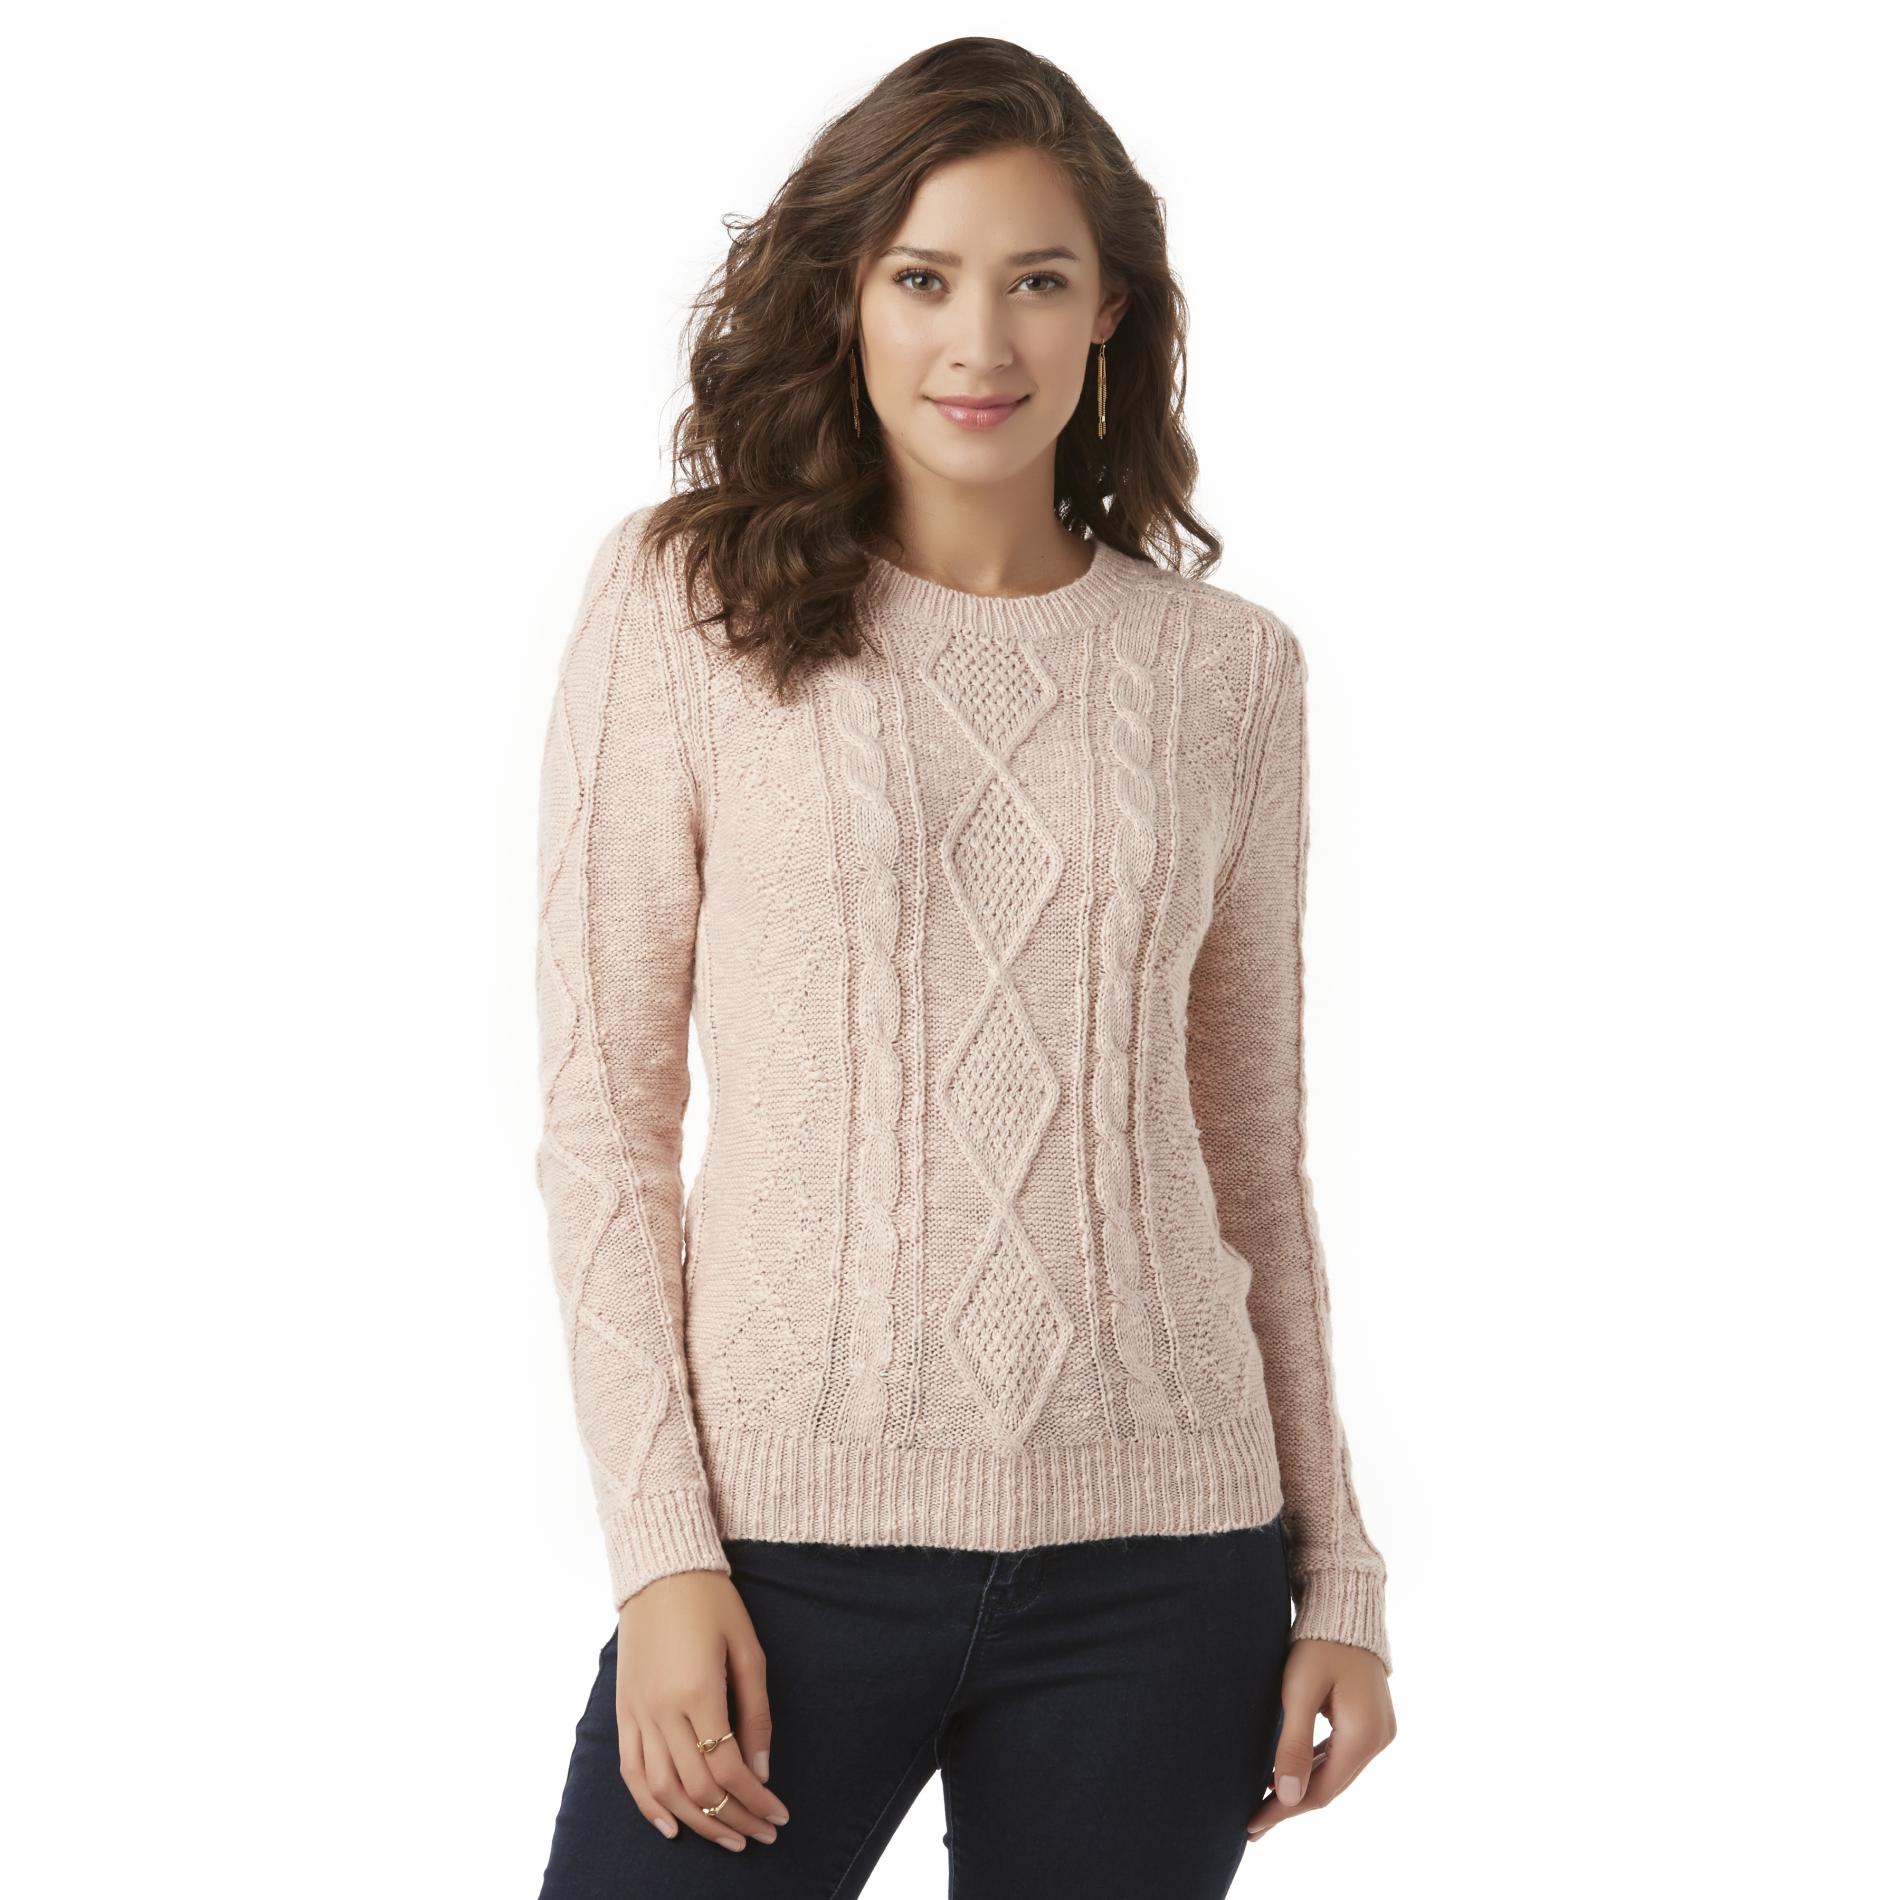 Metaphor Women's Cable Knit Sweater